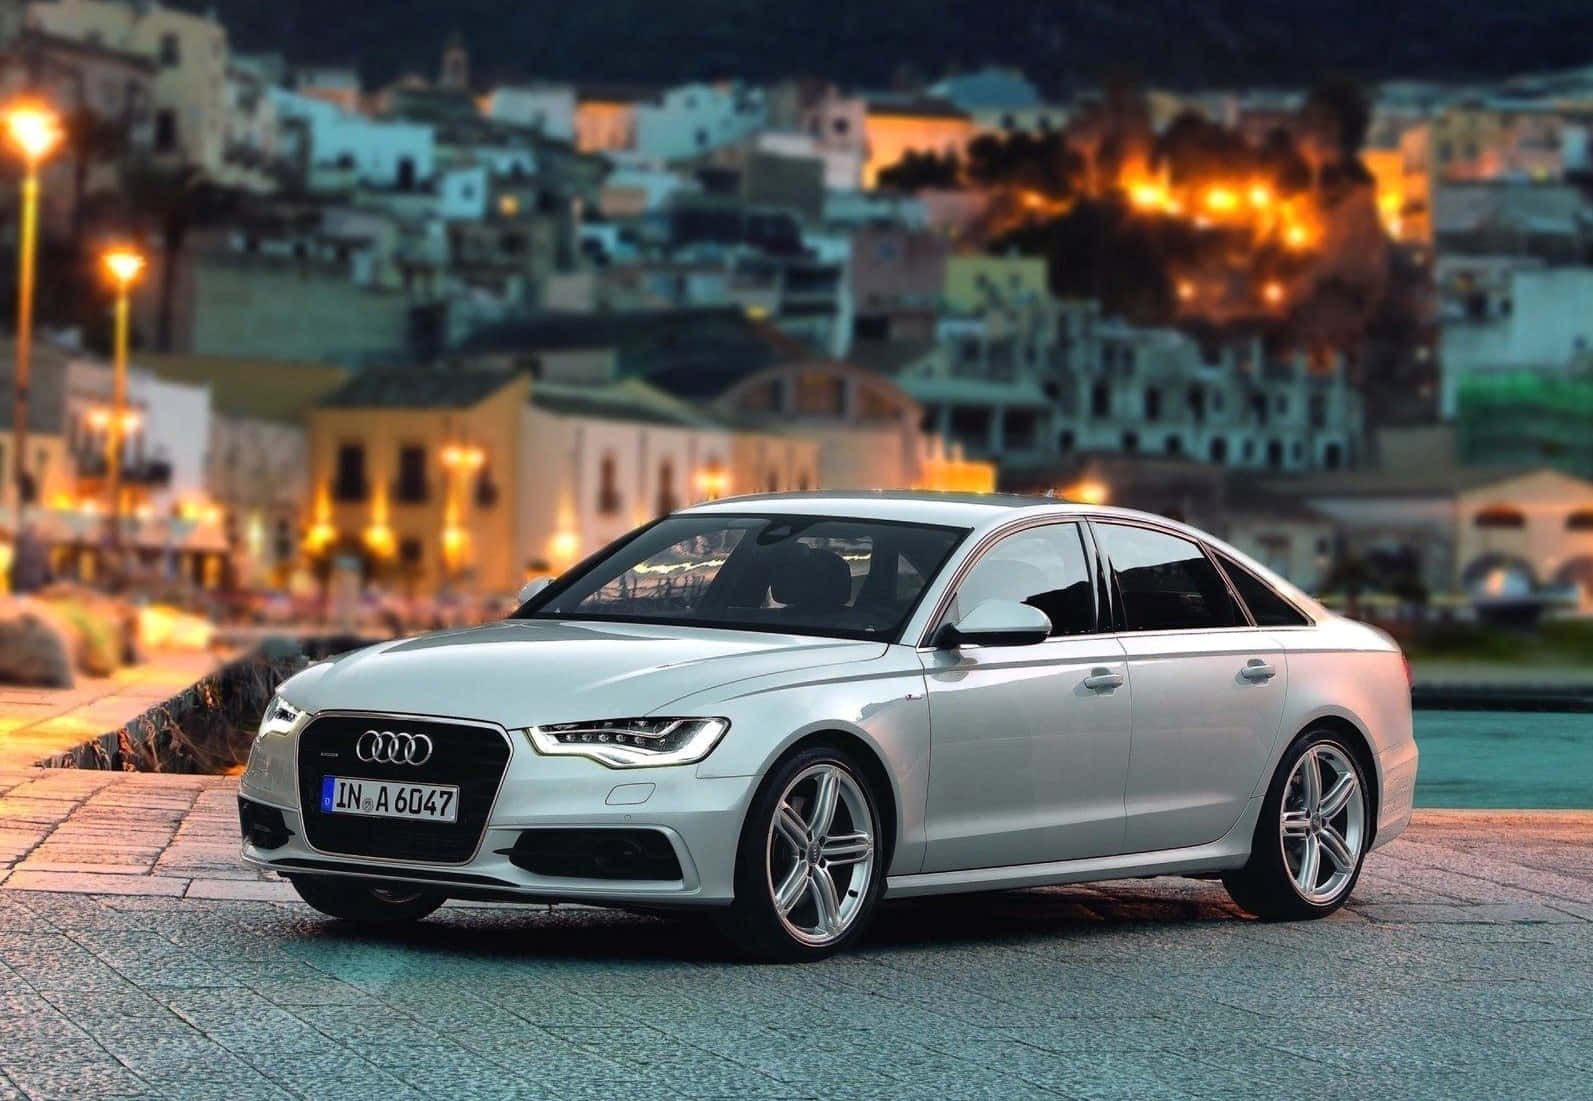 Sleek and Sophisticated Audi A6 in a Night Landscape Wallpaper